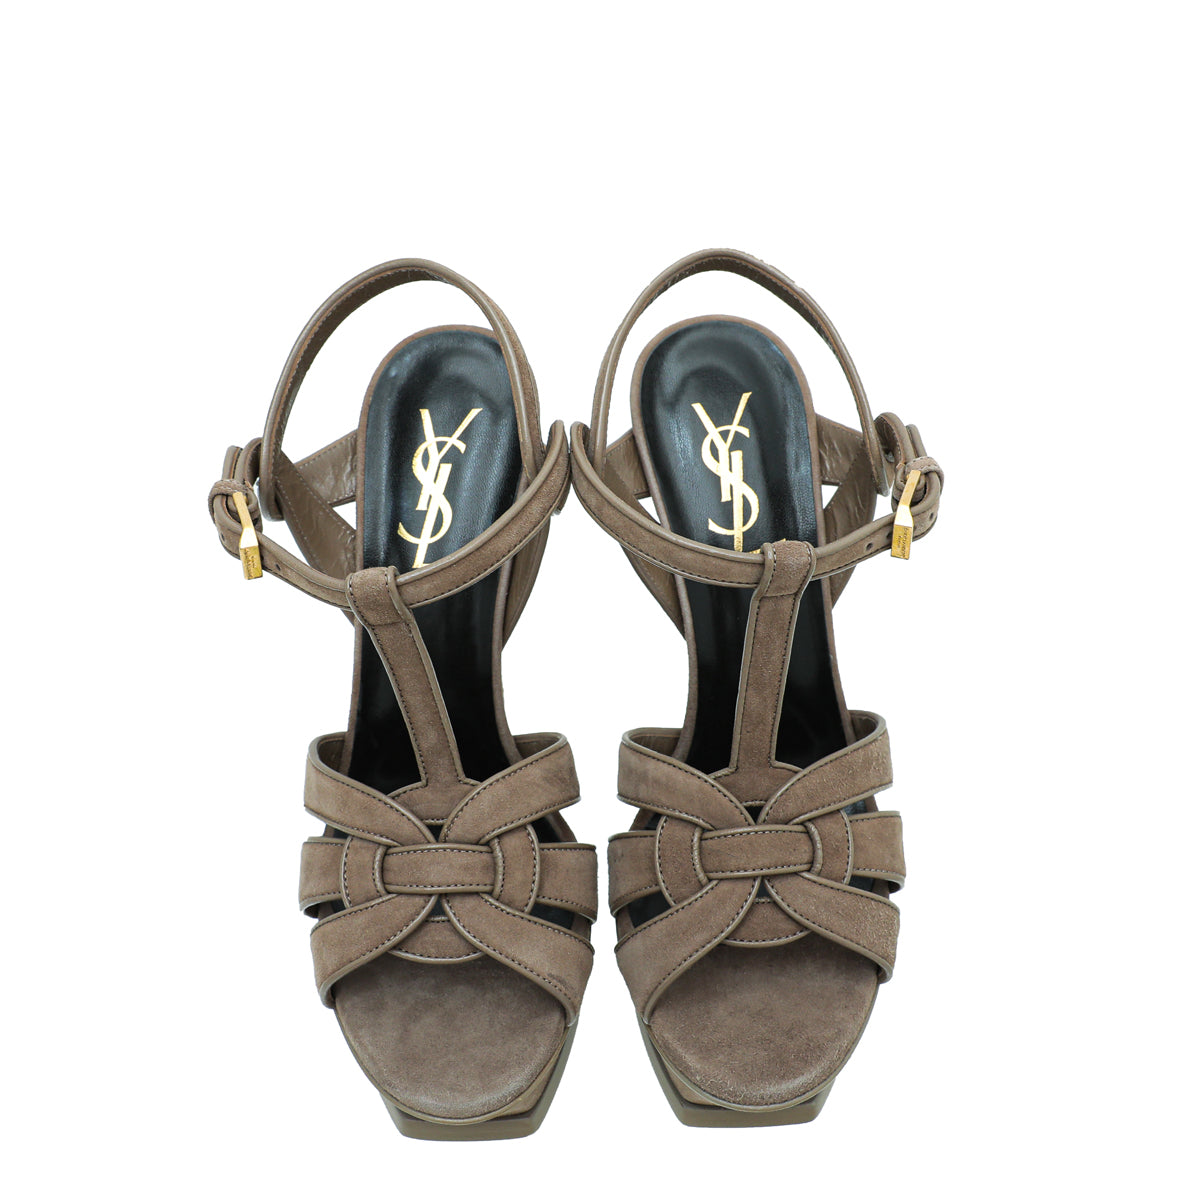 YSL Brown High Heeled Tribute Sandals 35.5